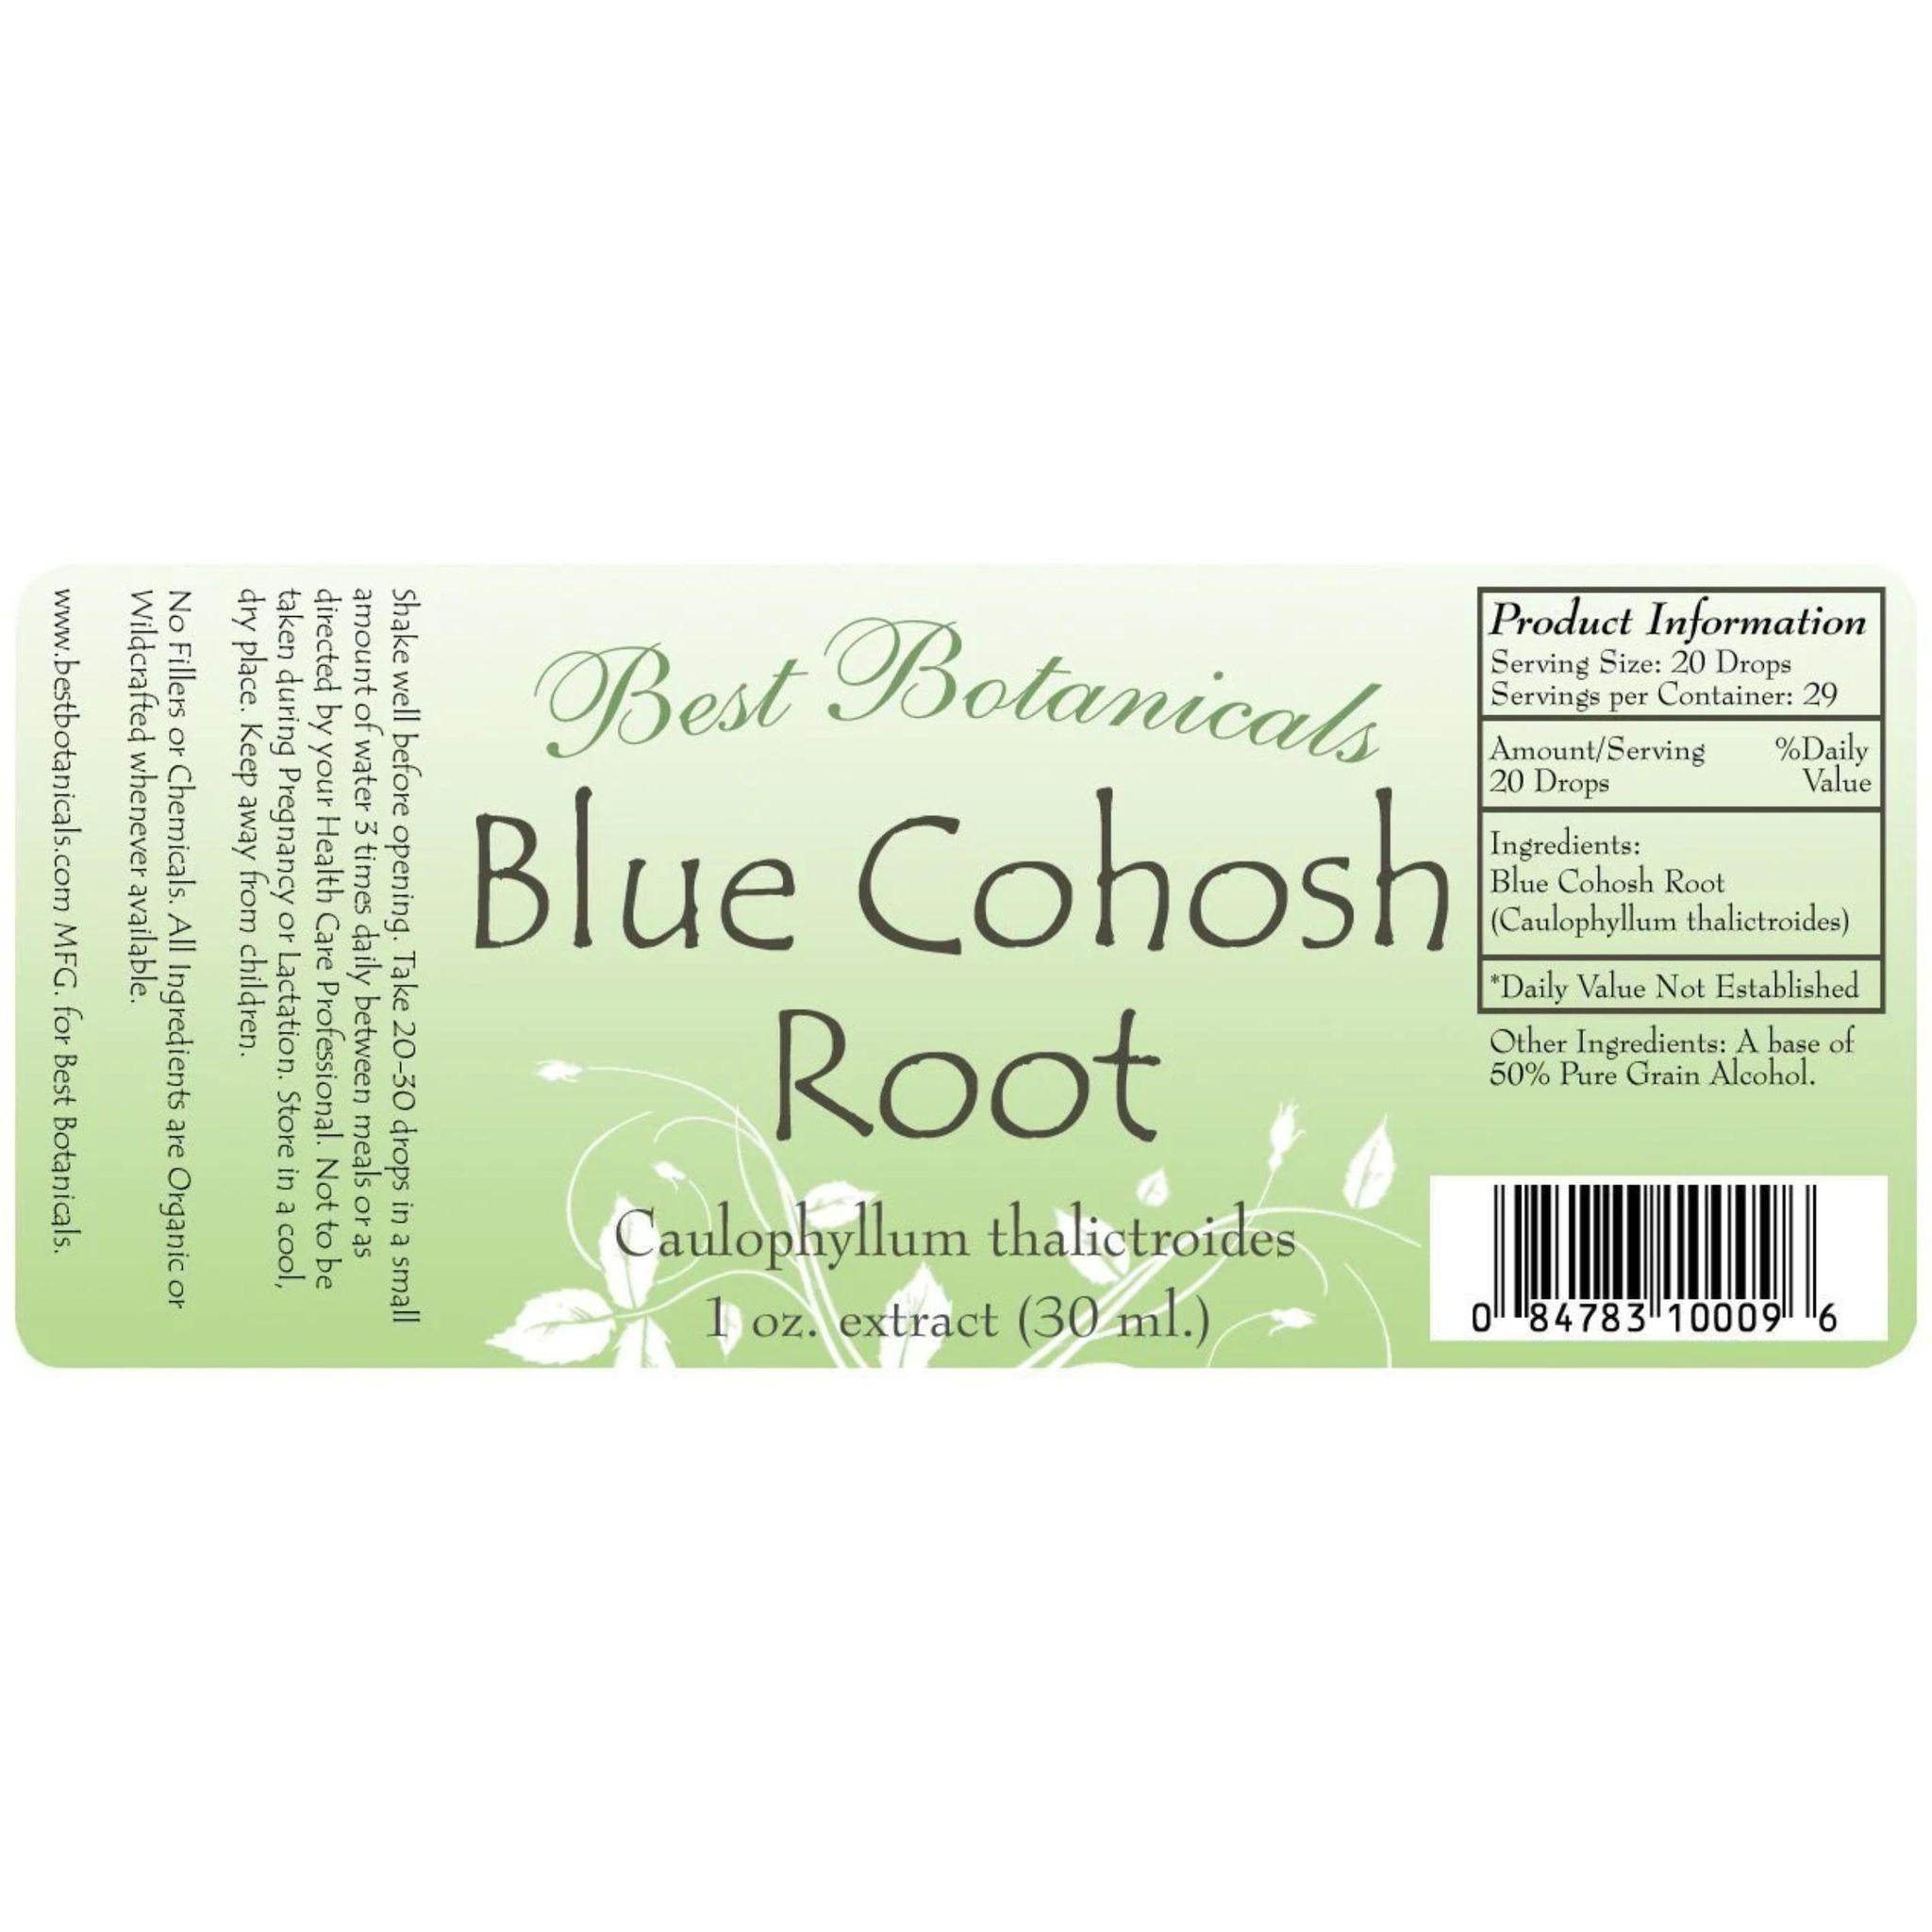 Blue Cohosh Root Extract 1 oz